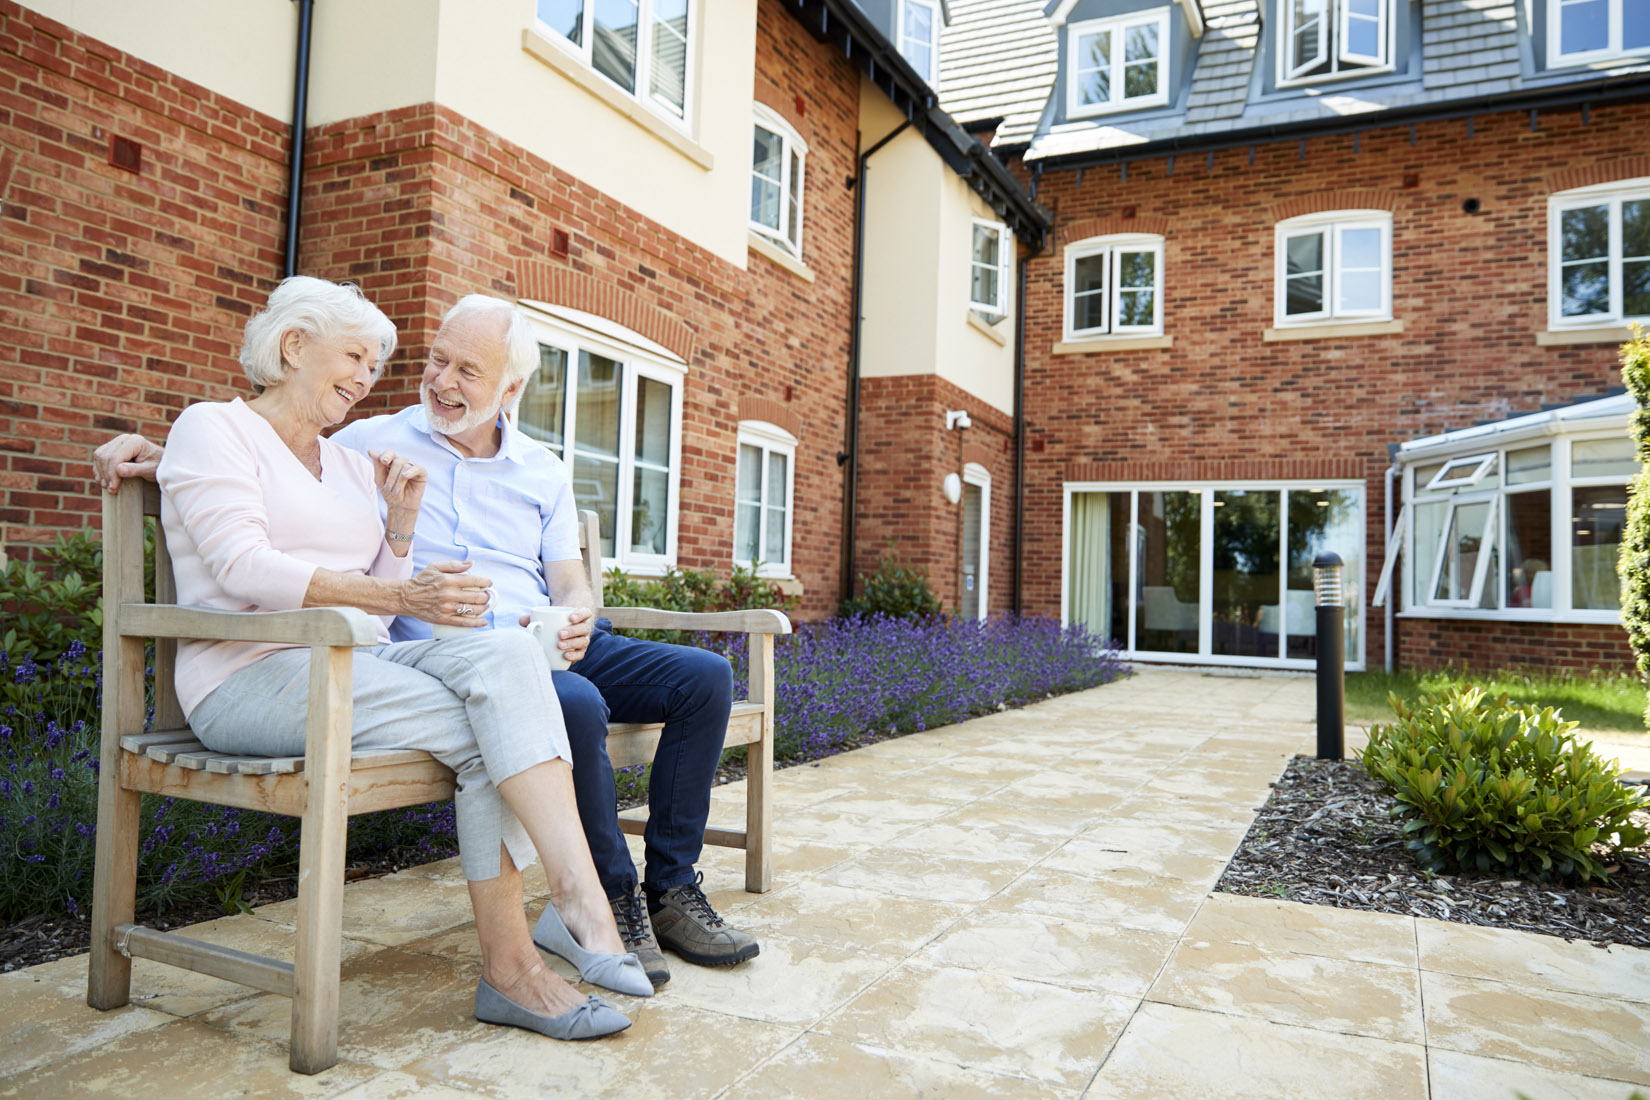 Build to Rent: A Solution for Elderly Housing in the UK